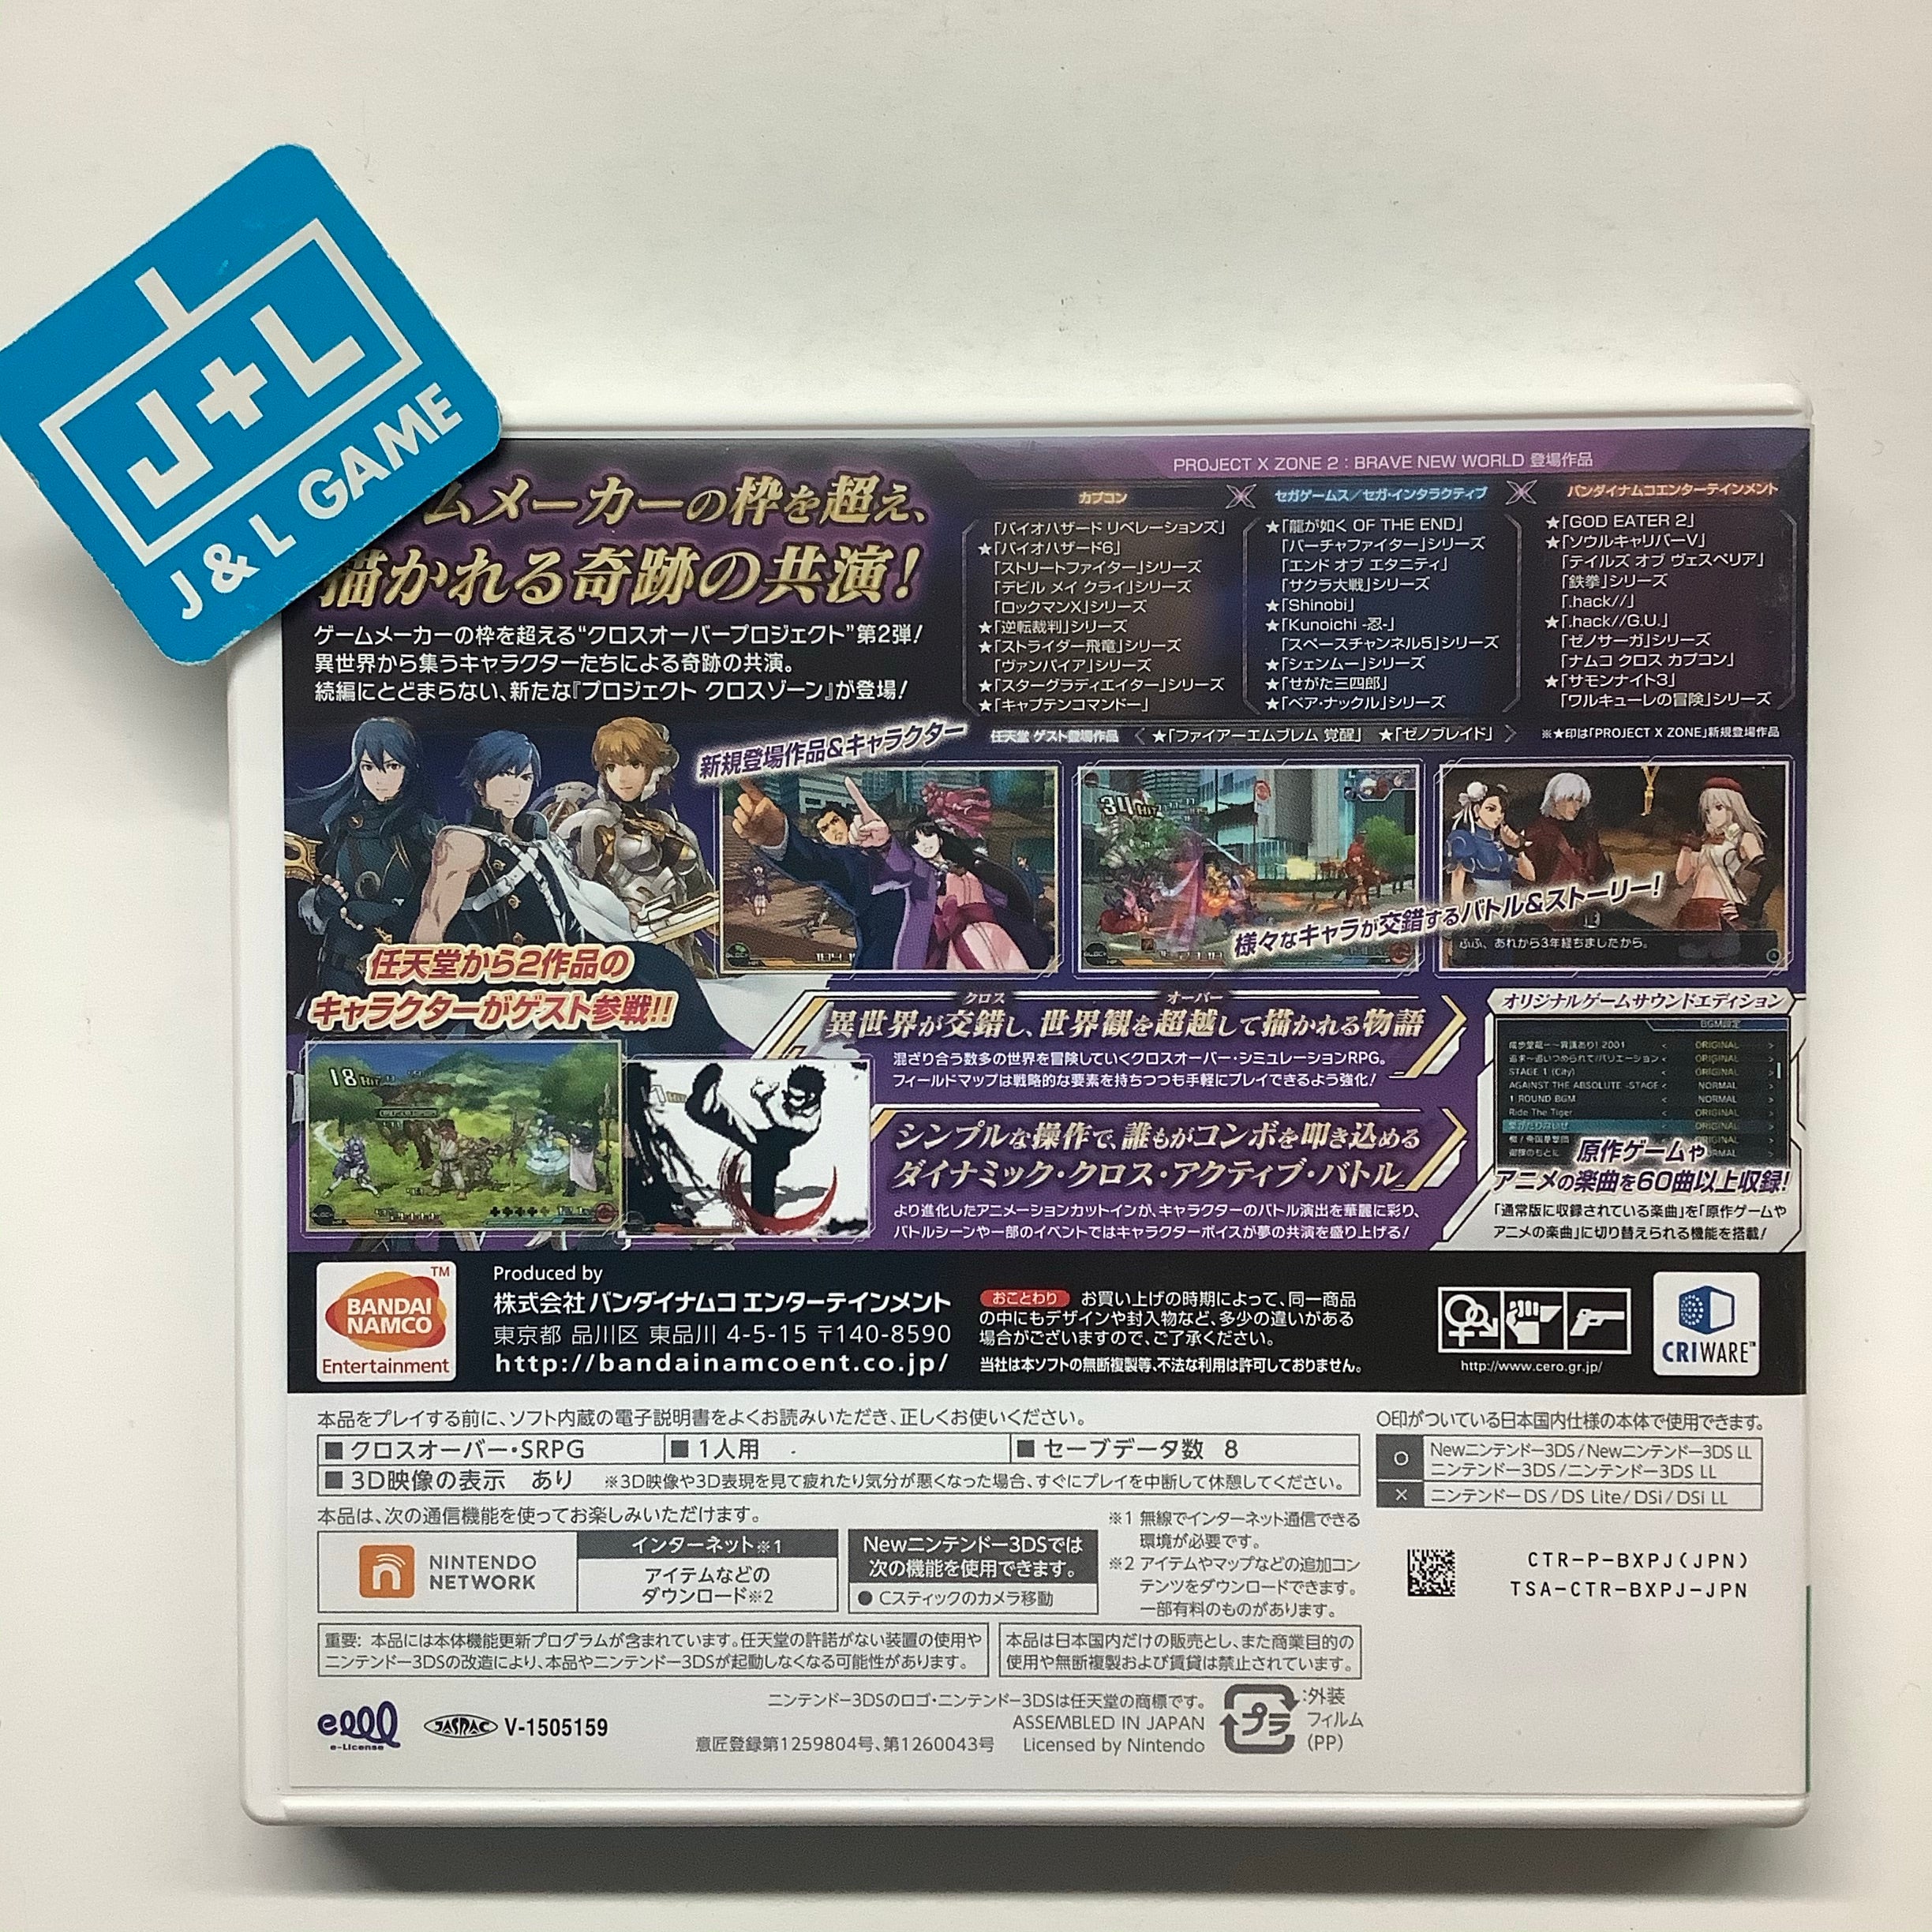 Project X Zone 2: Brave New World (Original Game Sound Edition) - Nintendo 3DS [Pre-Owned] (Japanese Import) Video Games Bandai Namco Entertainment   